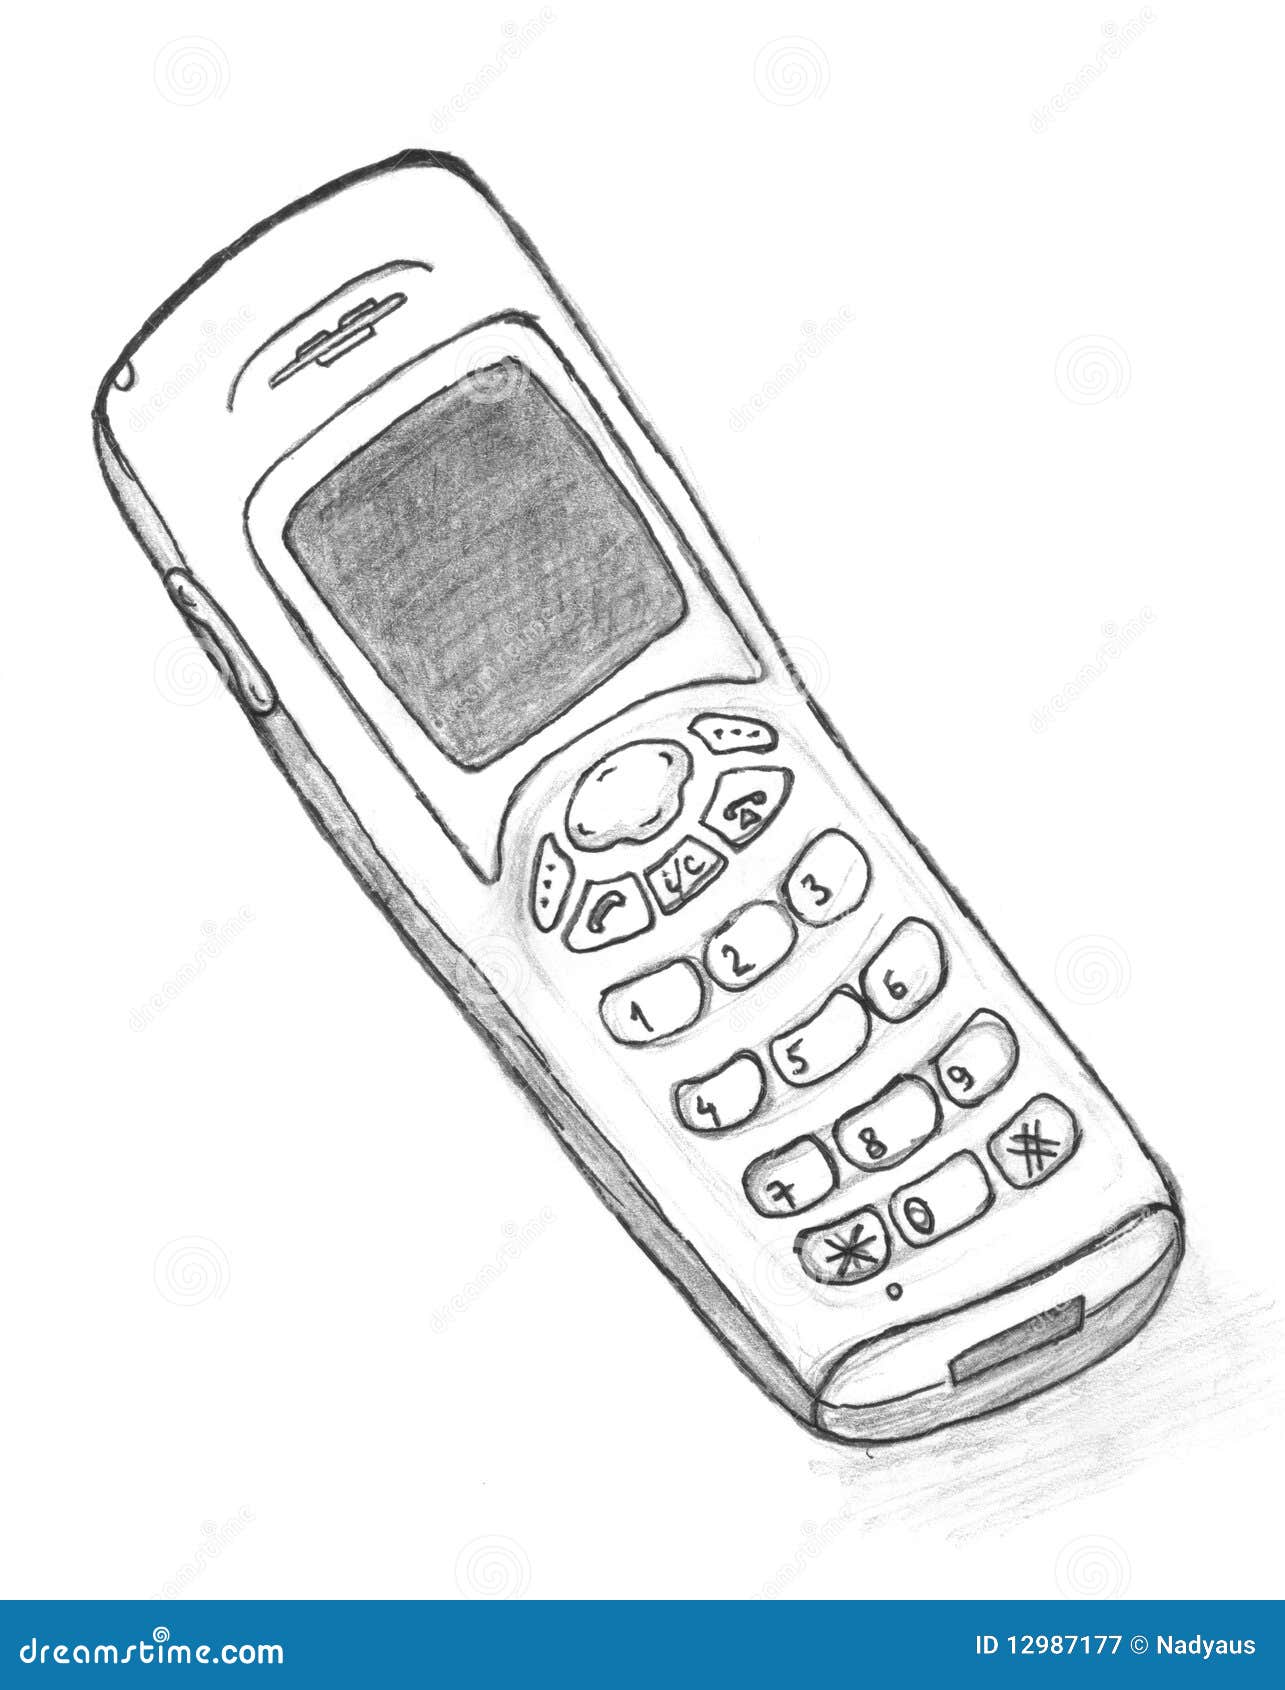 Hand drawn sketch of mobile phone Royalty Free Vector Image